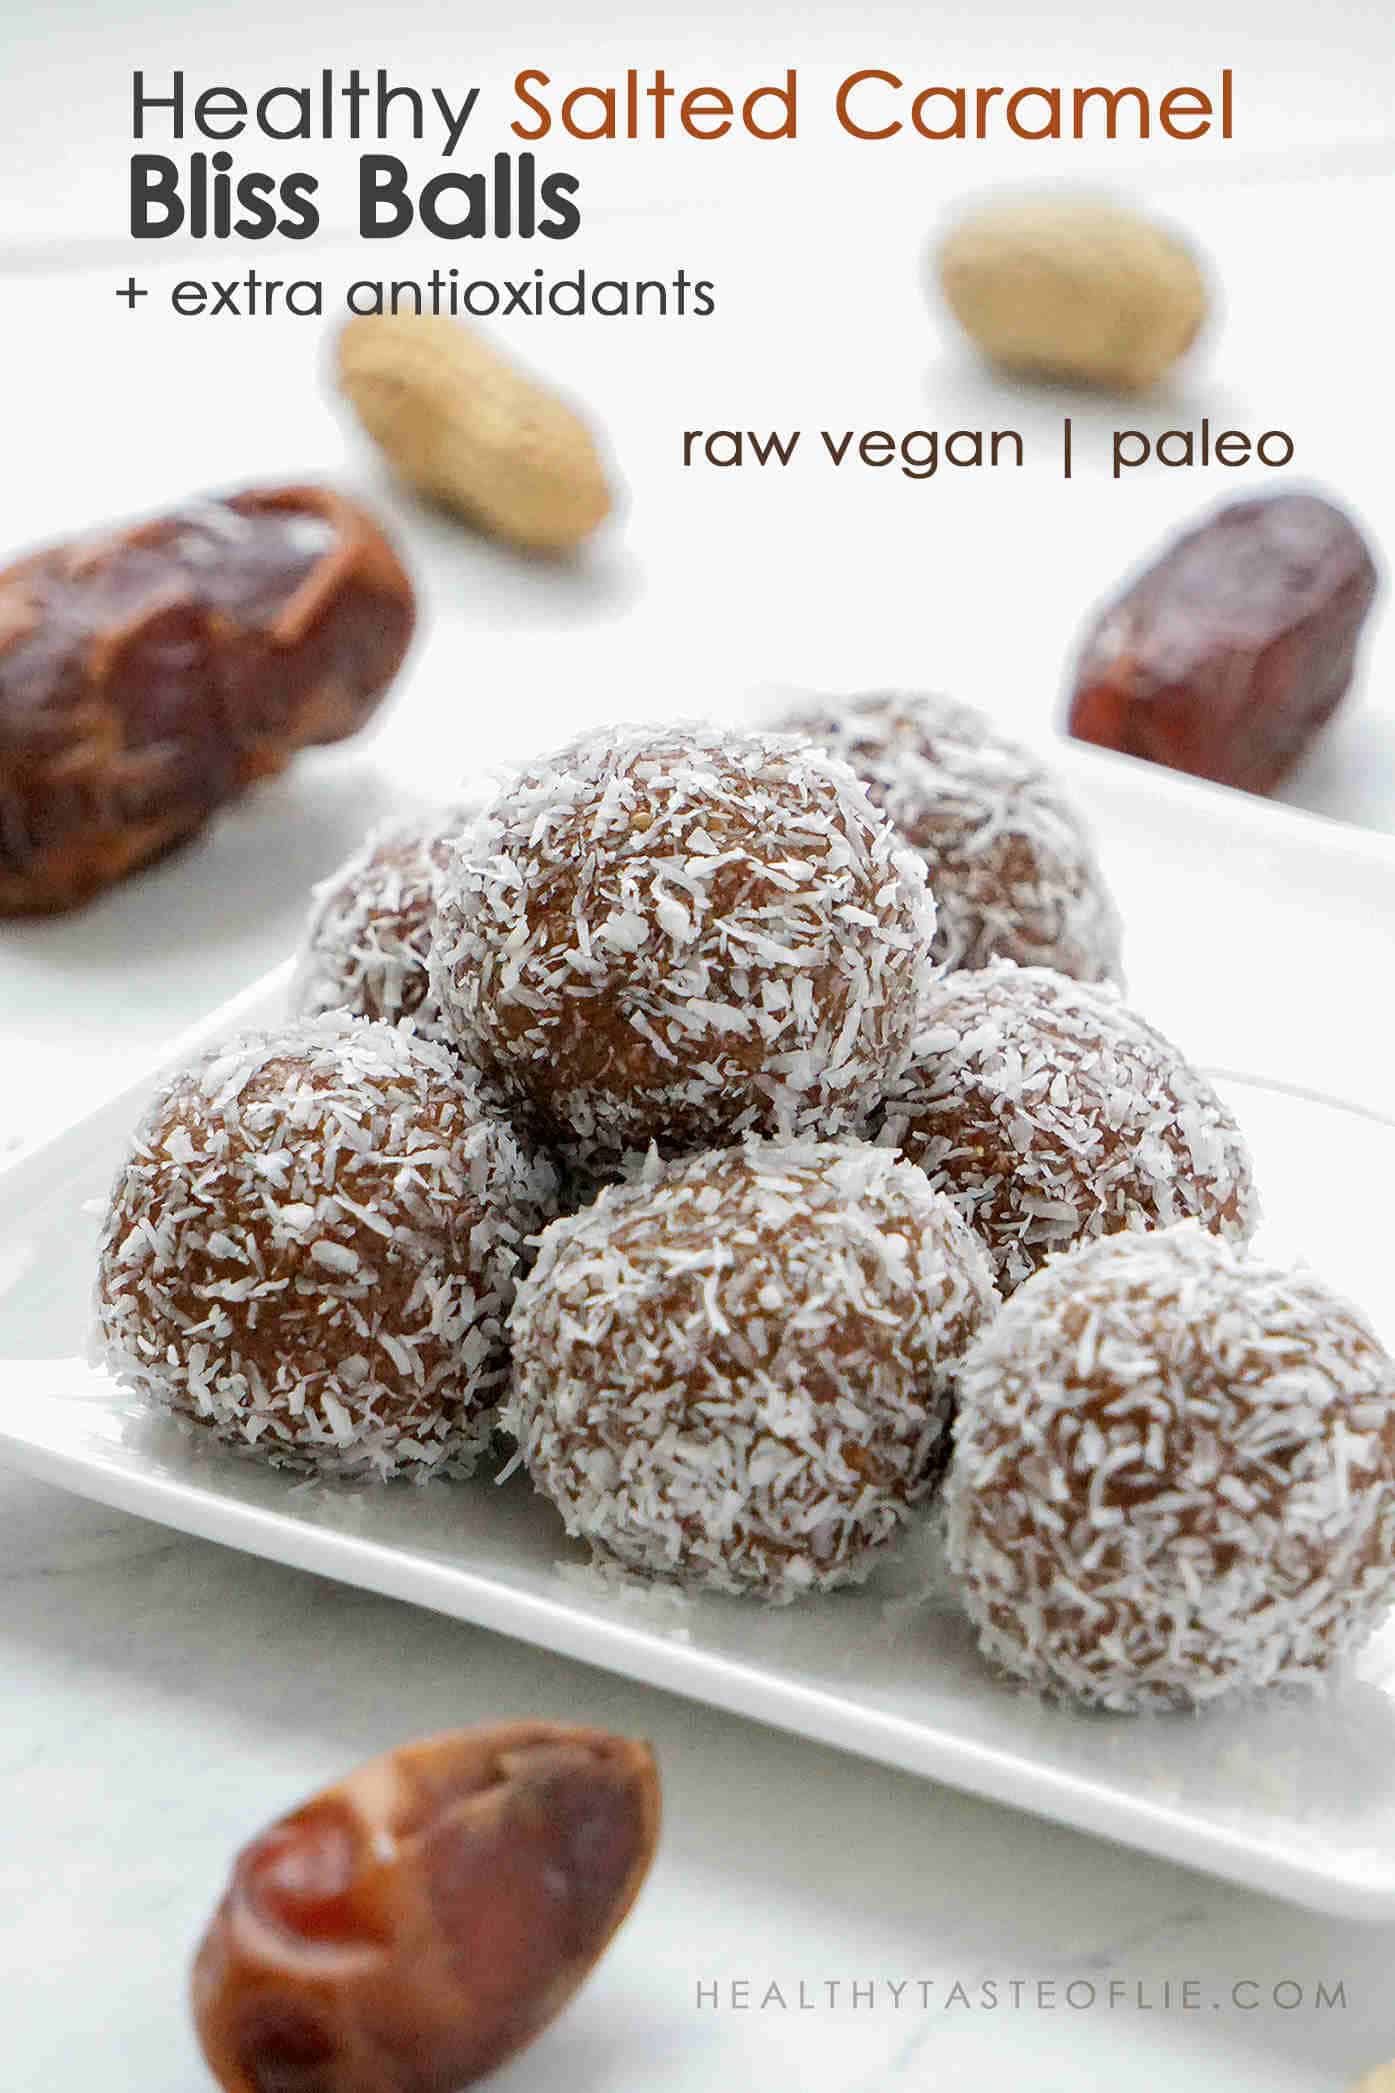 Healthy vegan peanut butter bliss balls recipe with salted caramel flavor made with peanut butter, dates, seeds and a few secret ingredients that enhances the caramel flavor and provide energy boosting and antioxidants as a bonus. These raw vegan paleo bliss balls are easy to make and make a healthy snack or a quick breakfast on the go.